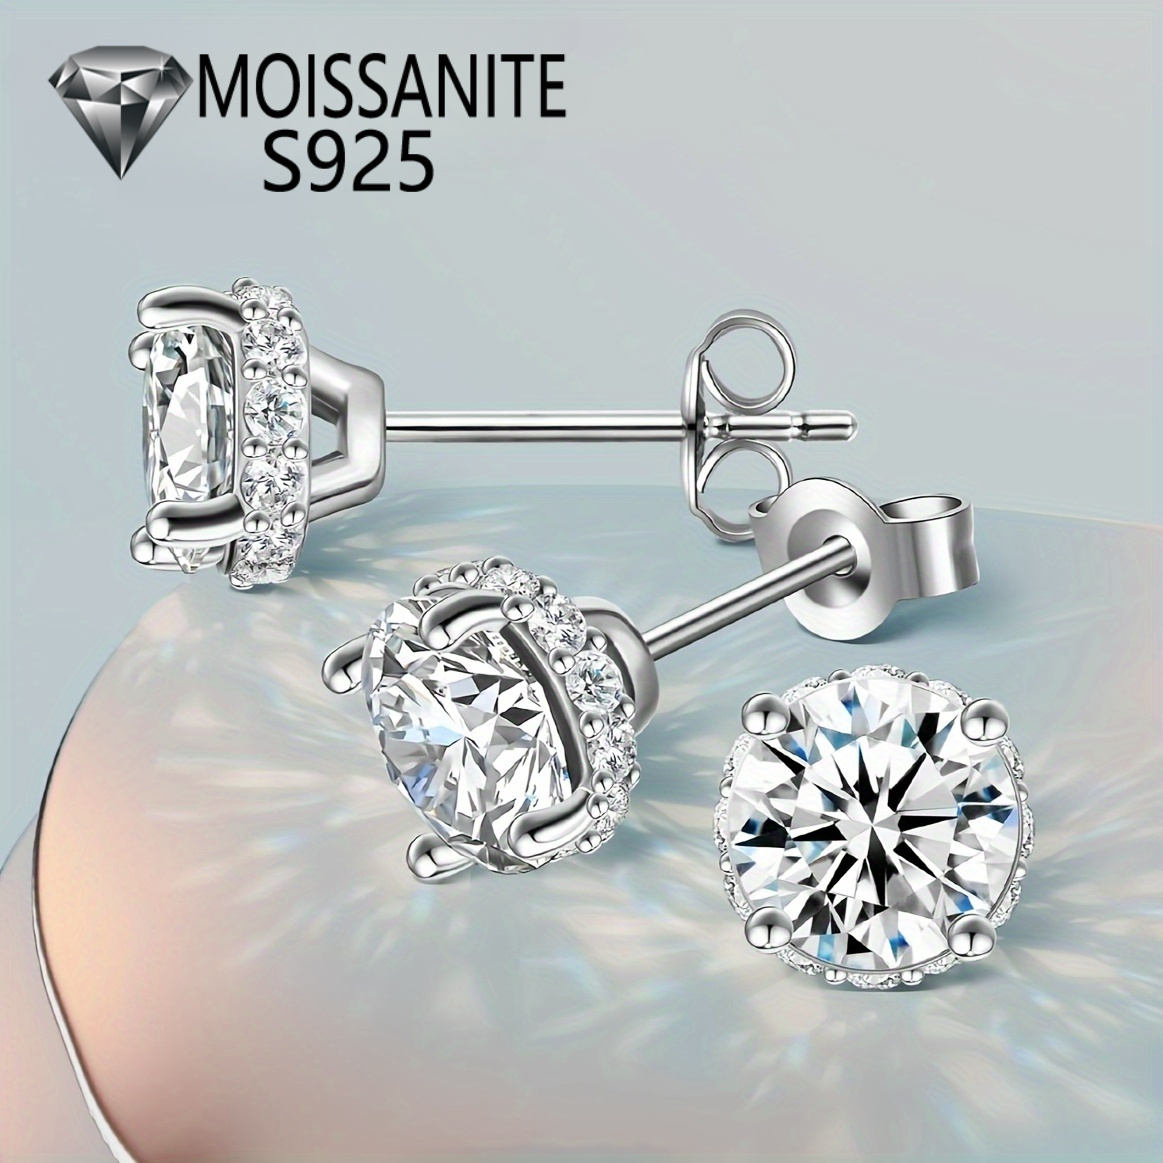 

1 Pair Elegant Classic Moissanite 925 Sterling Silver Stud Earrings 1 Carat Each Unisex Ear Jewelry With Gift Box For Birthday, Anniversary Everyday Wear, Dates, Parties, Vacations, Honeymoon